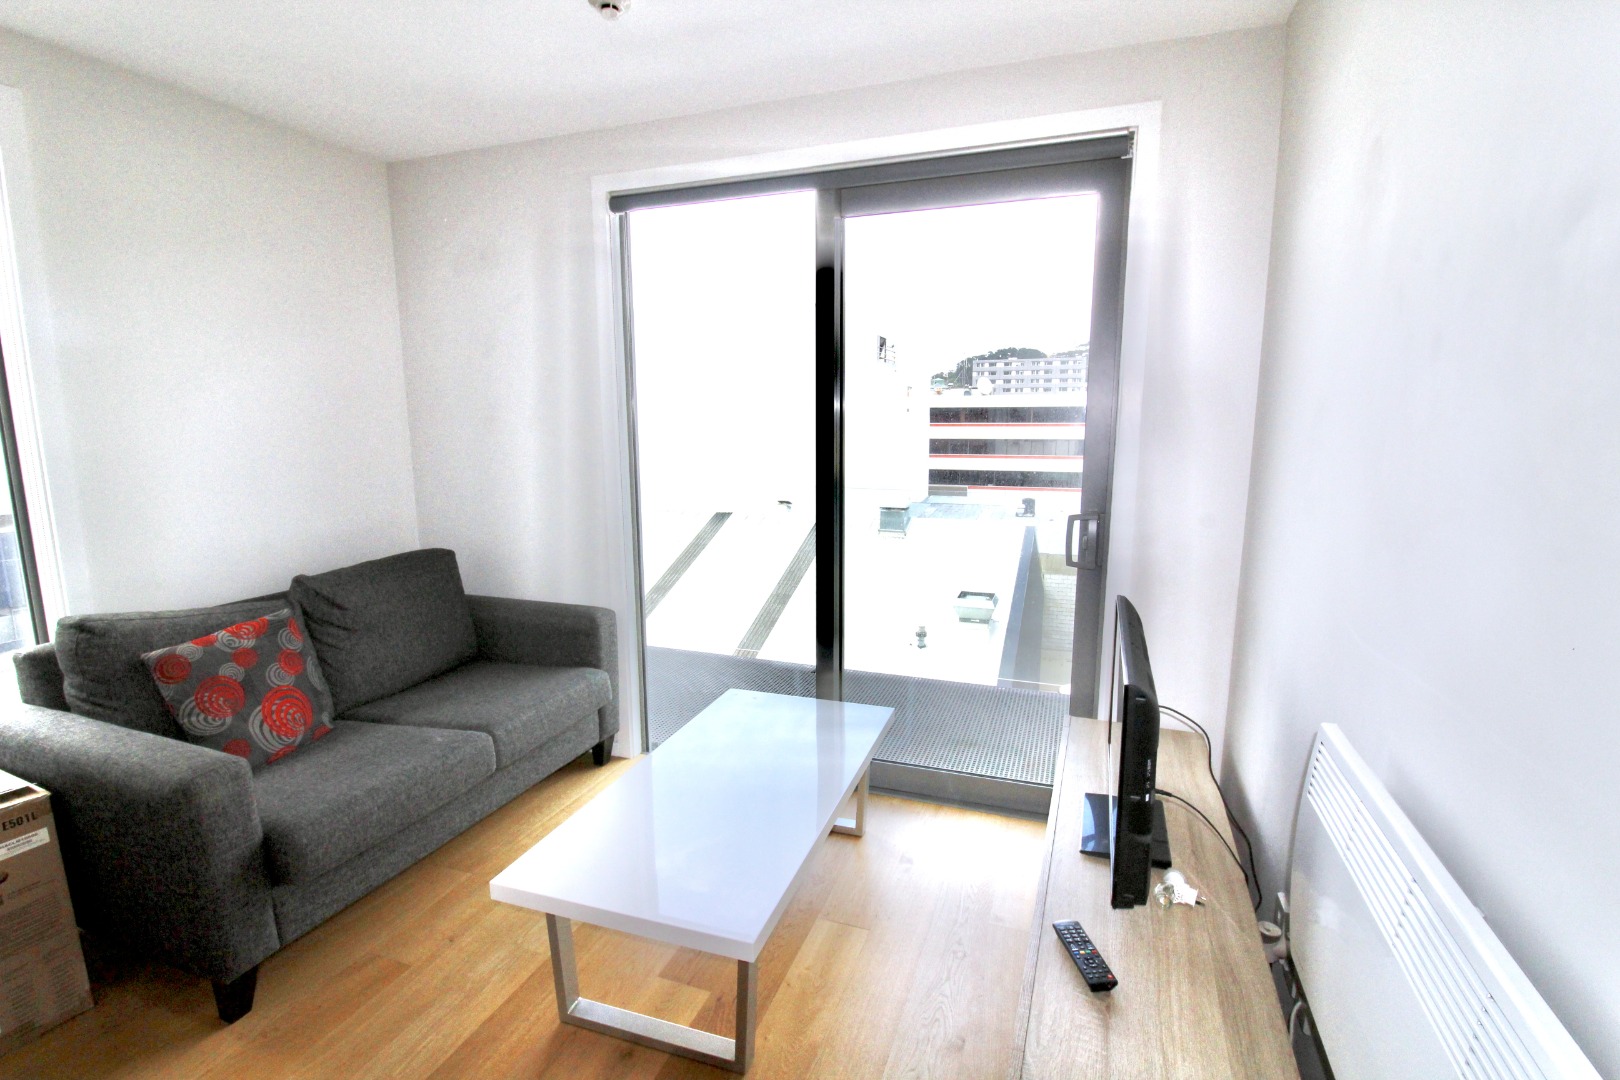 Real Estate For Rent Houses & Apartments : Near New Modern 1 Bedroom Apartment - FURNISHED, Wellington